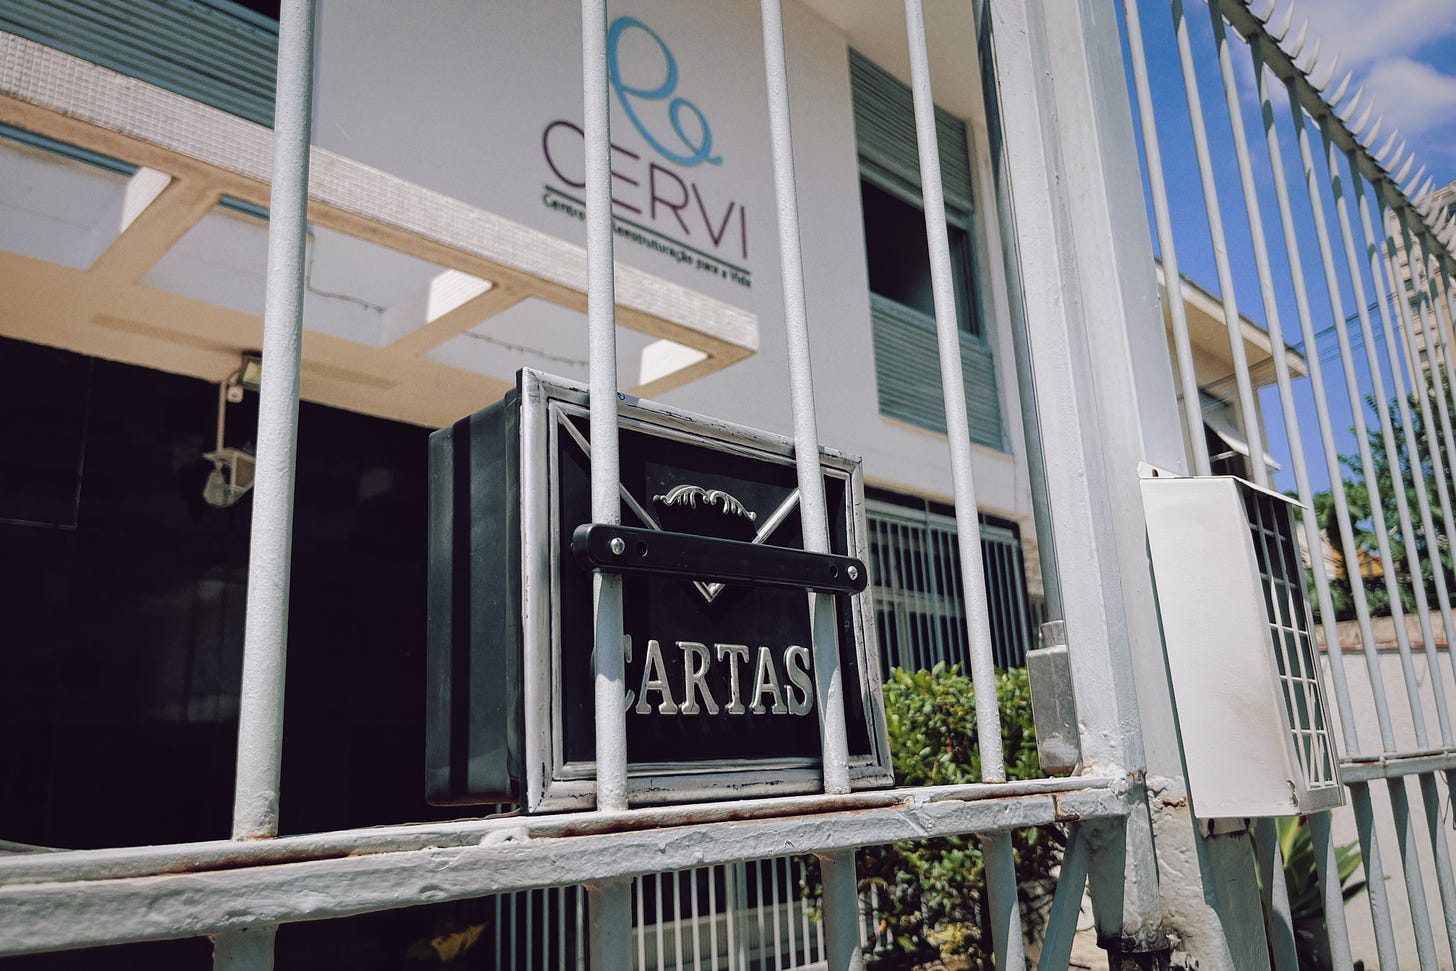 A white building with a sign that says CERVI, seen through a tall gate. Bright blue sky is visible in the background.